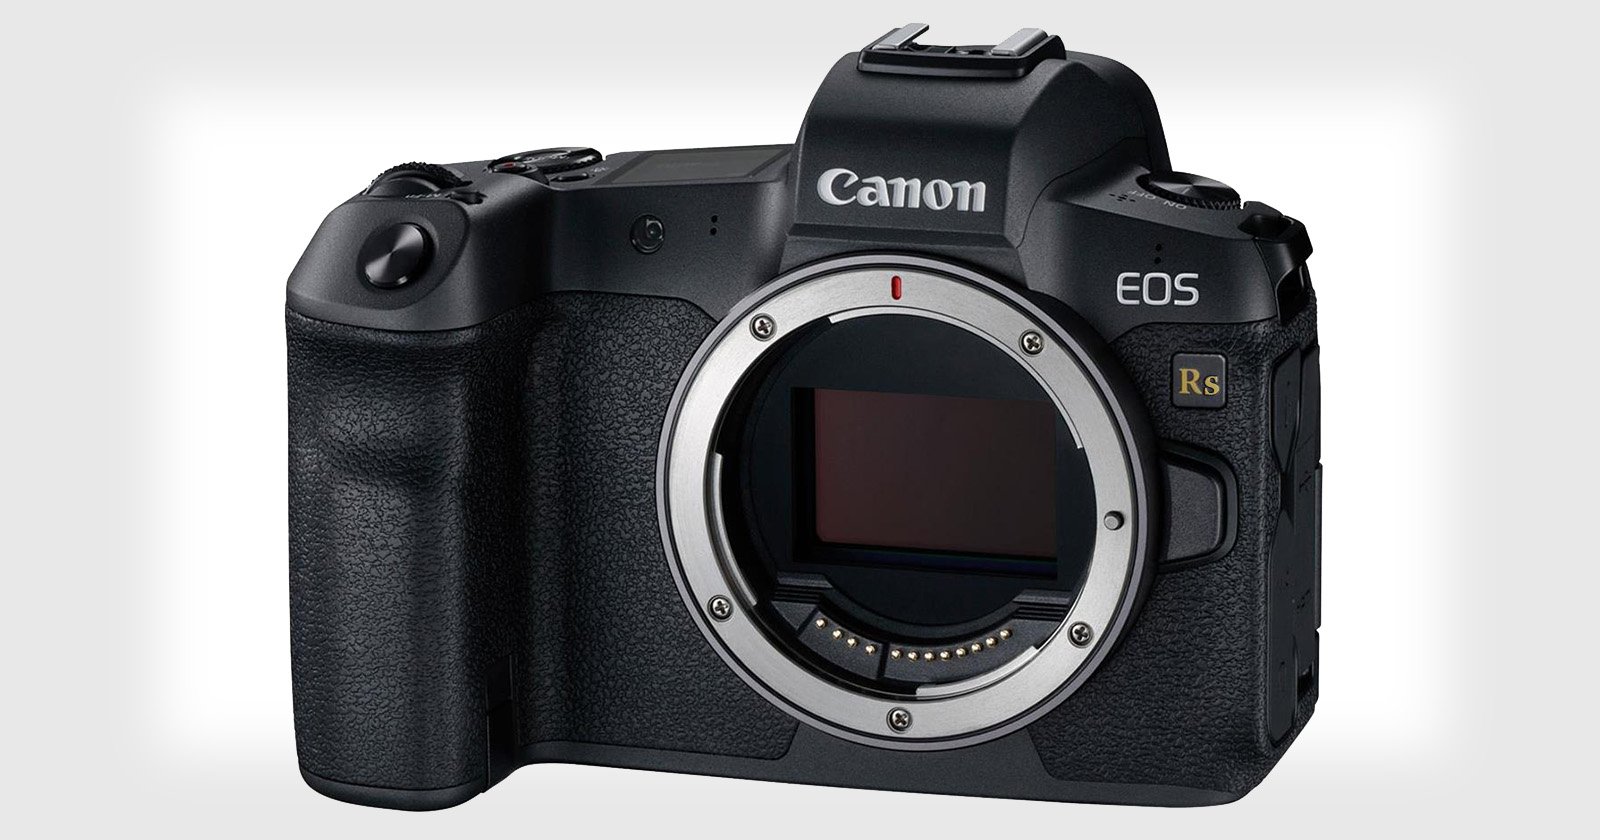 75MP Canon EOS Rs with Dual Card Slots Coming in February 2020: Report